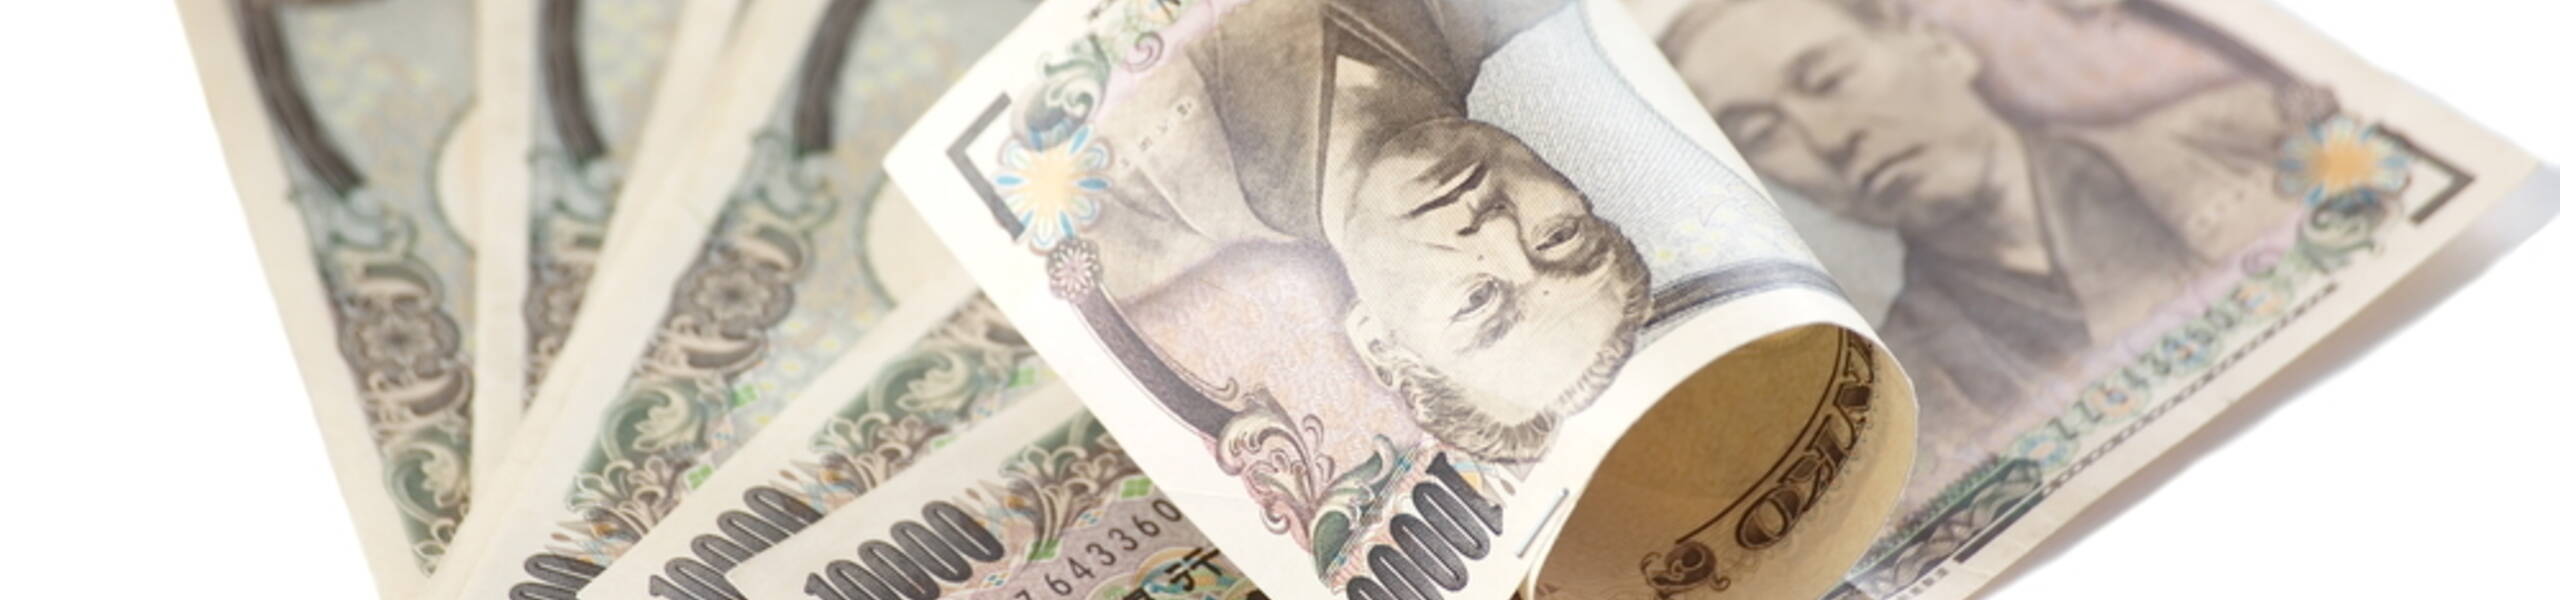 USD/JPY consolidation period remains intact